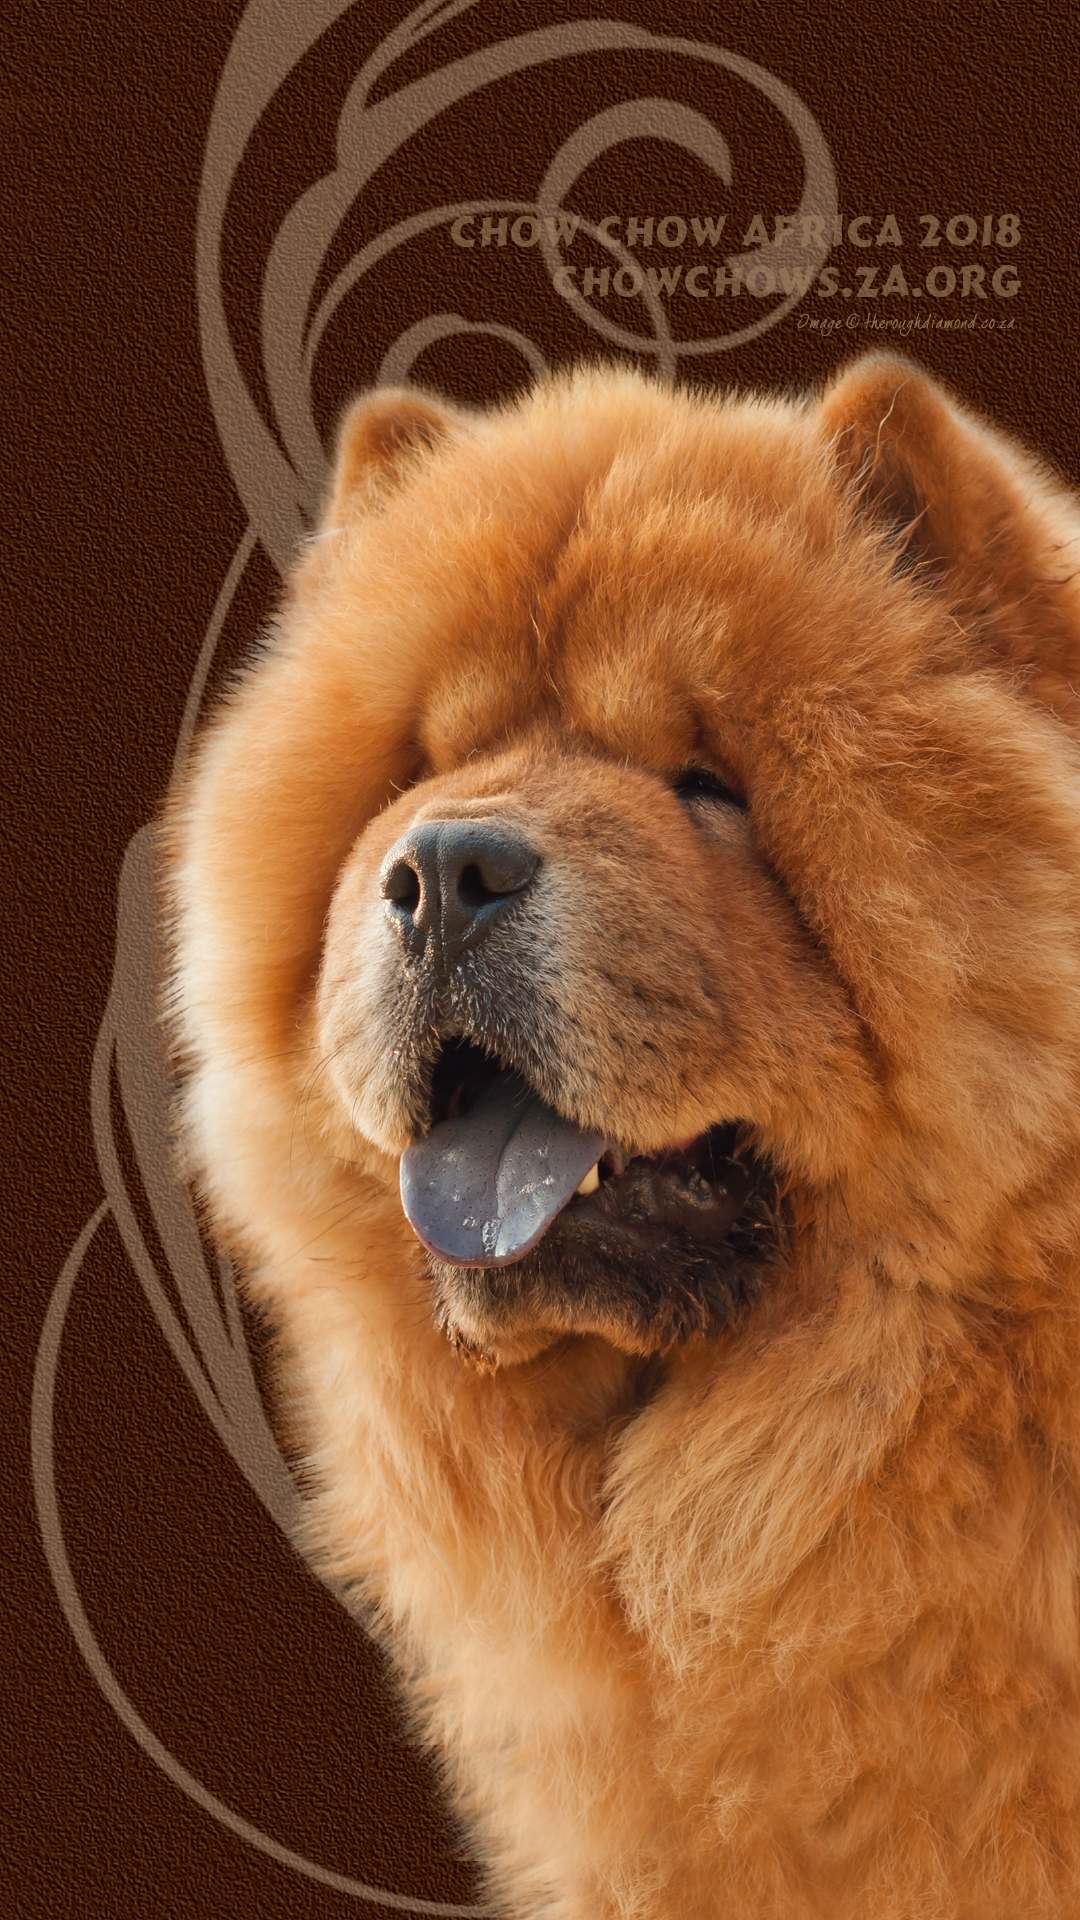 Chow Chow Africa